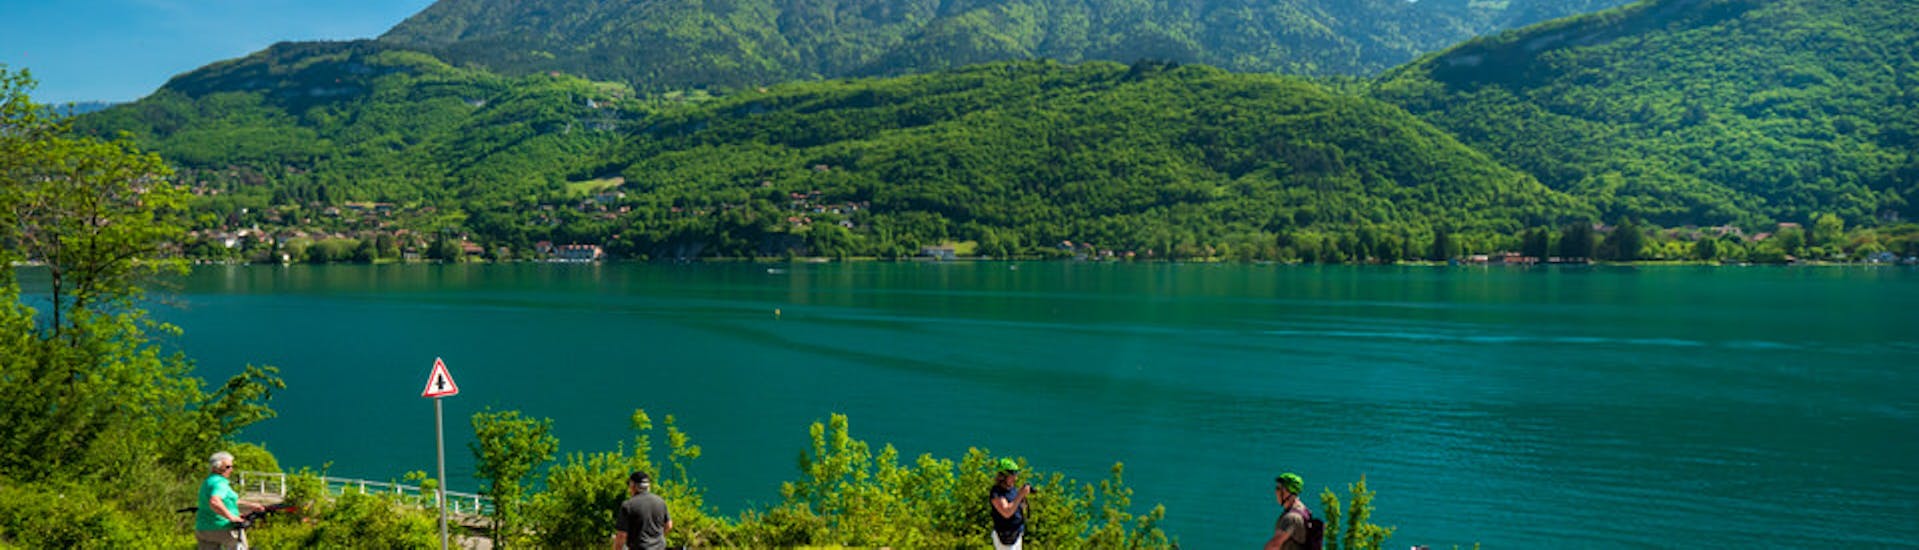 View of the landscape during the hybrid Bike Hire at Lake Annecy.